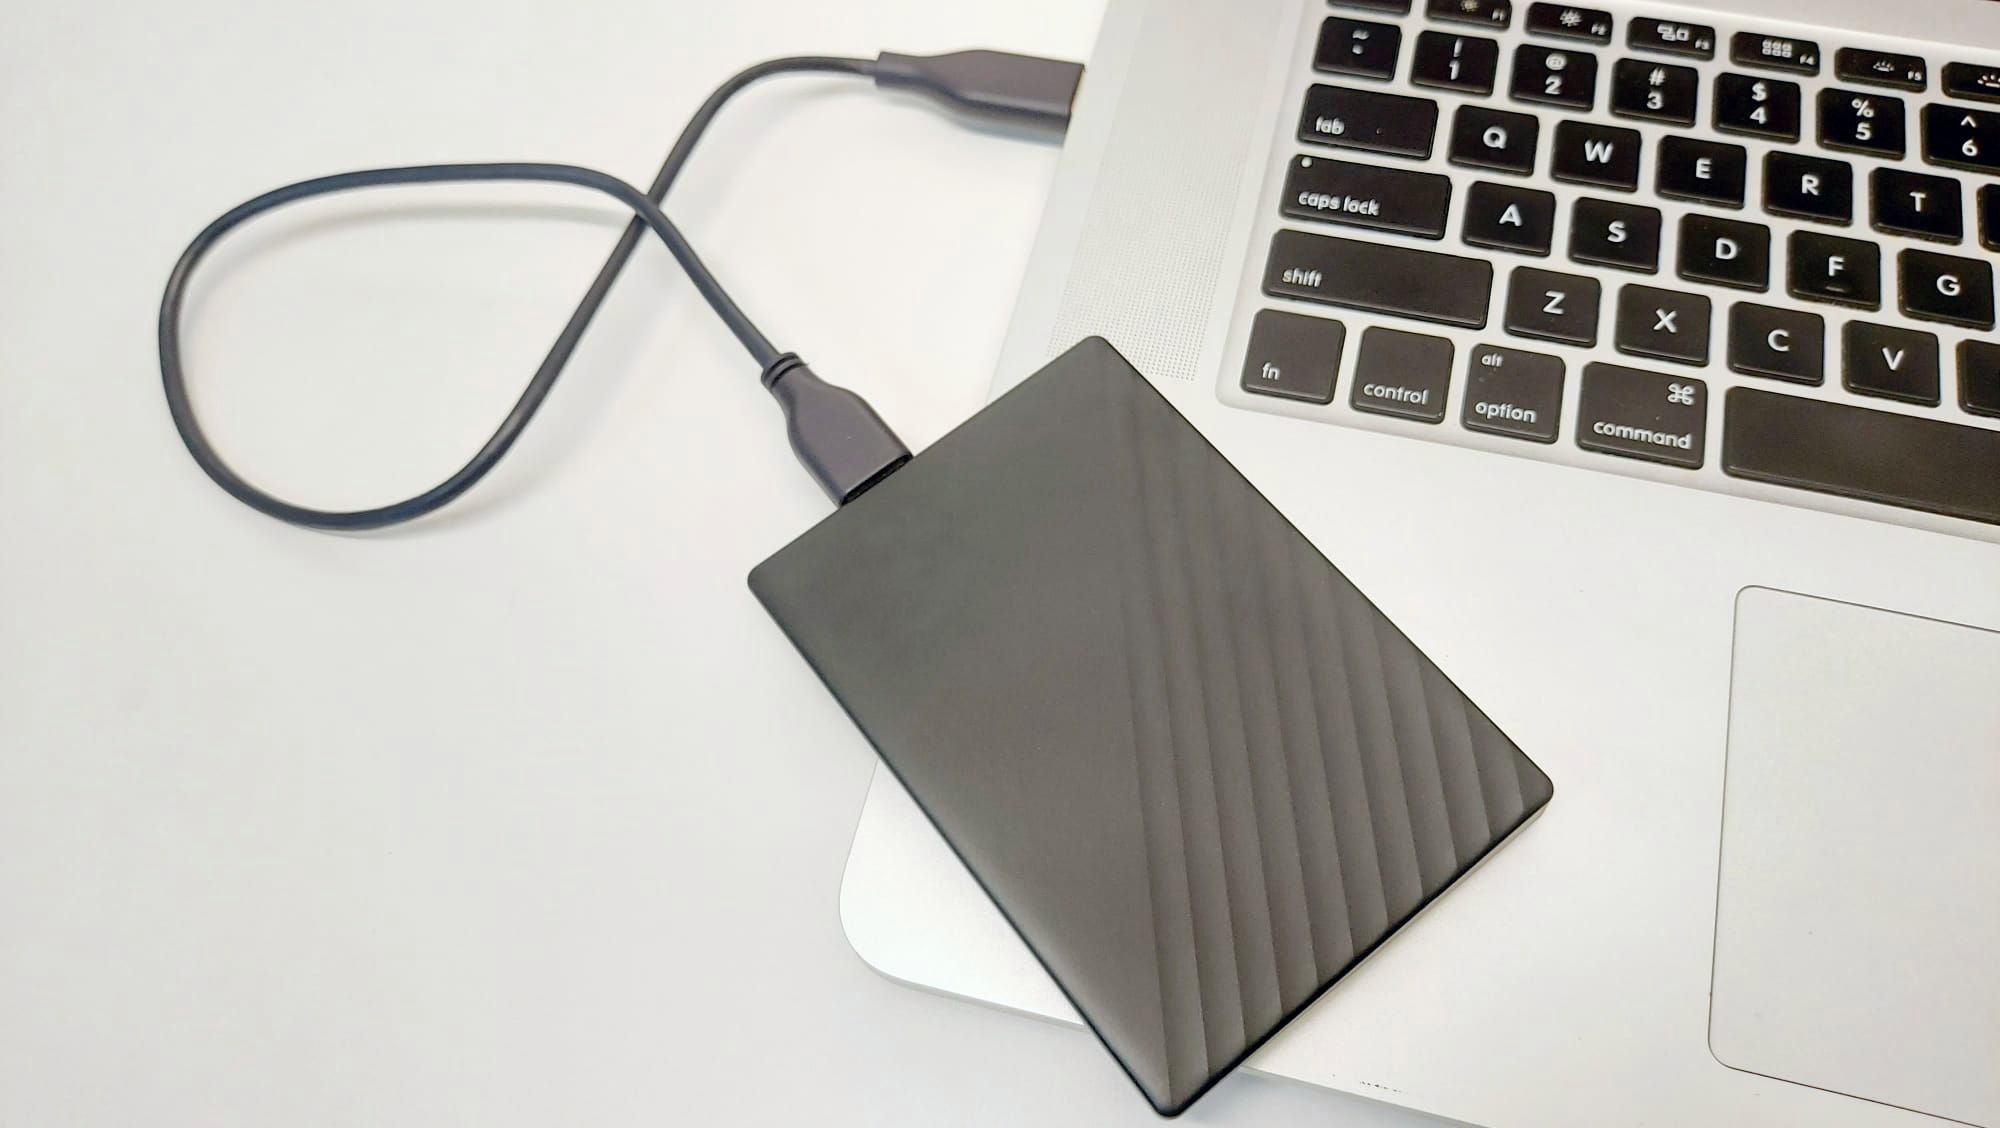 How To Fix Bad Sectors On External Hard Drive